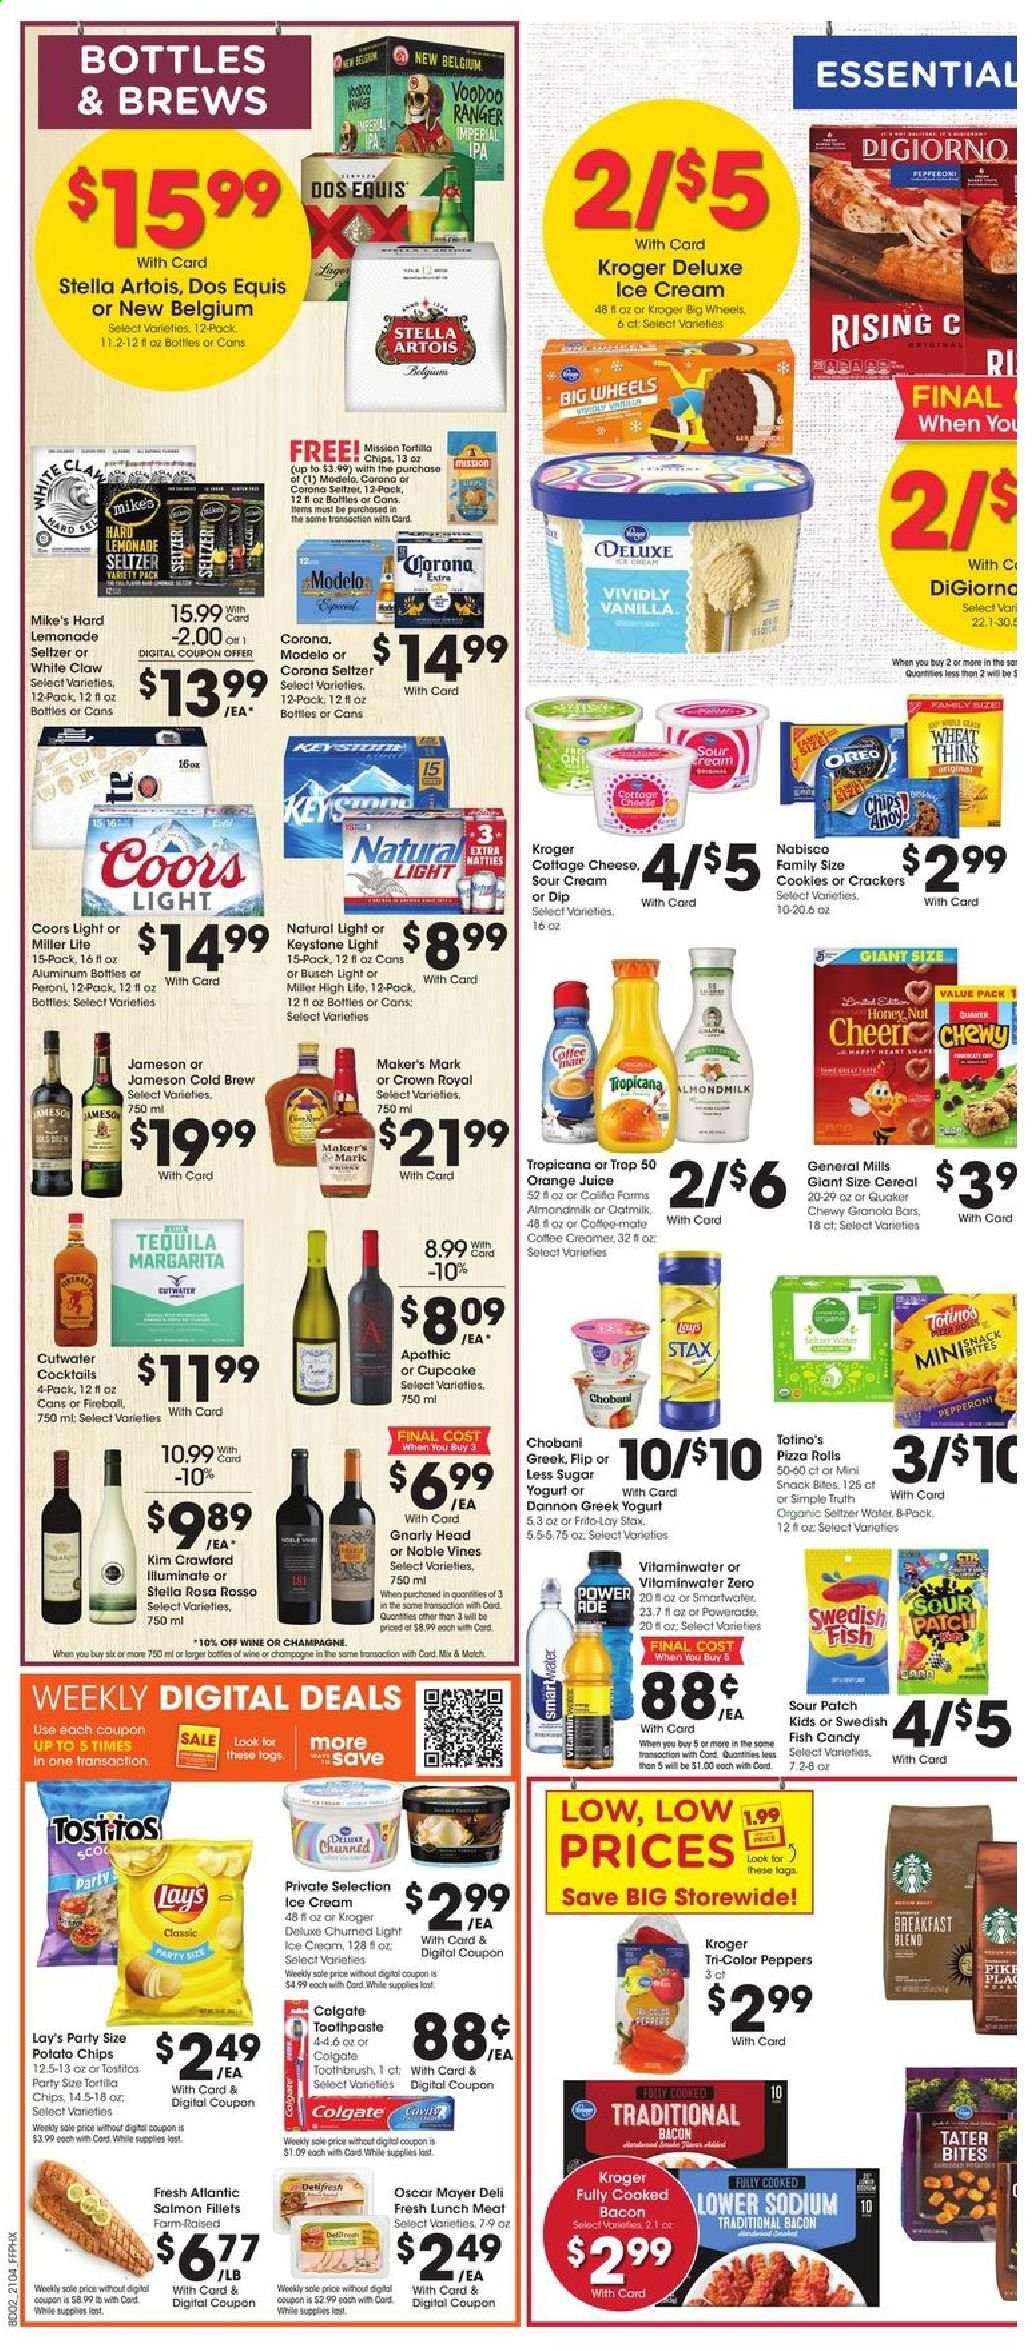 thumbnail - Fry’s Flyer - 02/24/2021 - 03/02/2021 - Sales products - salmon, salmon fillet, northern pike, pizza, Quaker, bacon, Oscar Mayer, pepperoni, lunch meat, cottage cheese, cheese, greek yoghurt, Oreo, yoghurt, Chobani, Dannon, almond milk, oat milk, sour cream, dip, ice cream, cookies, crackers, Sour Patch, tortilla chips, potato chips, chips, snack, Lay’s, Thins, Frito-Lay, cereals, granola bar, lemonade, Powerade, orange juice, juice, seltzer water, coffee, breakfast blend, champagne, wine, tequila, Jameson, White Claw, beer, Miller Lite, Stella Artois, Coors, Dos Equis, Busch, Corona Extra, Peroni, IPA, Keystone, Modelo, Colgate, toothbrush, toothpaste. Page 4.